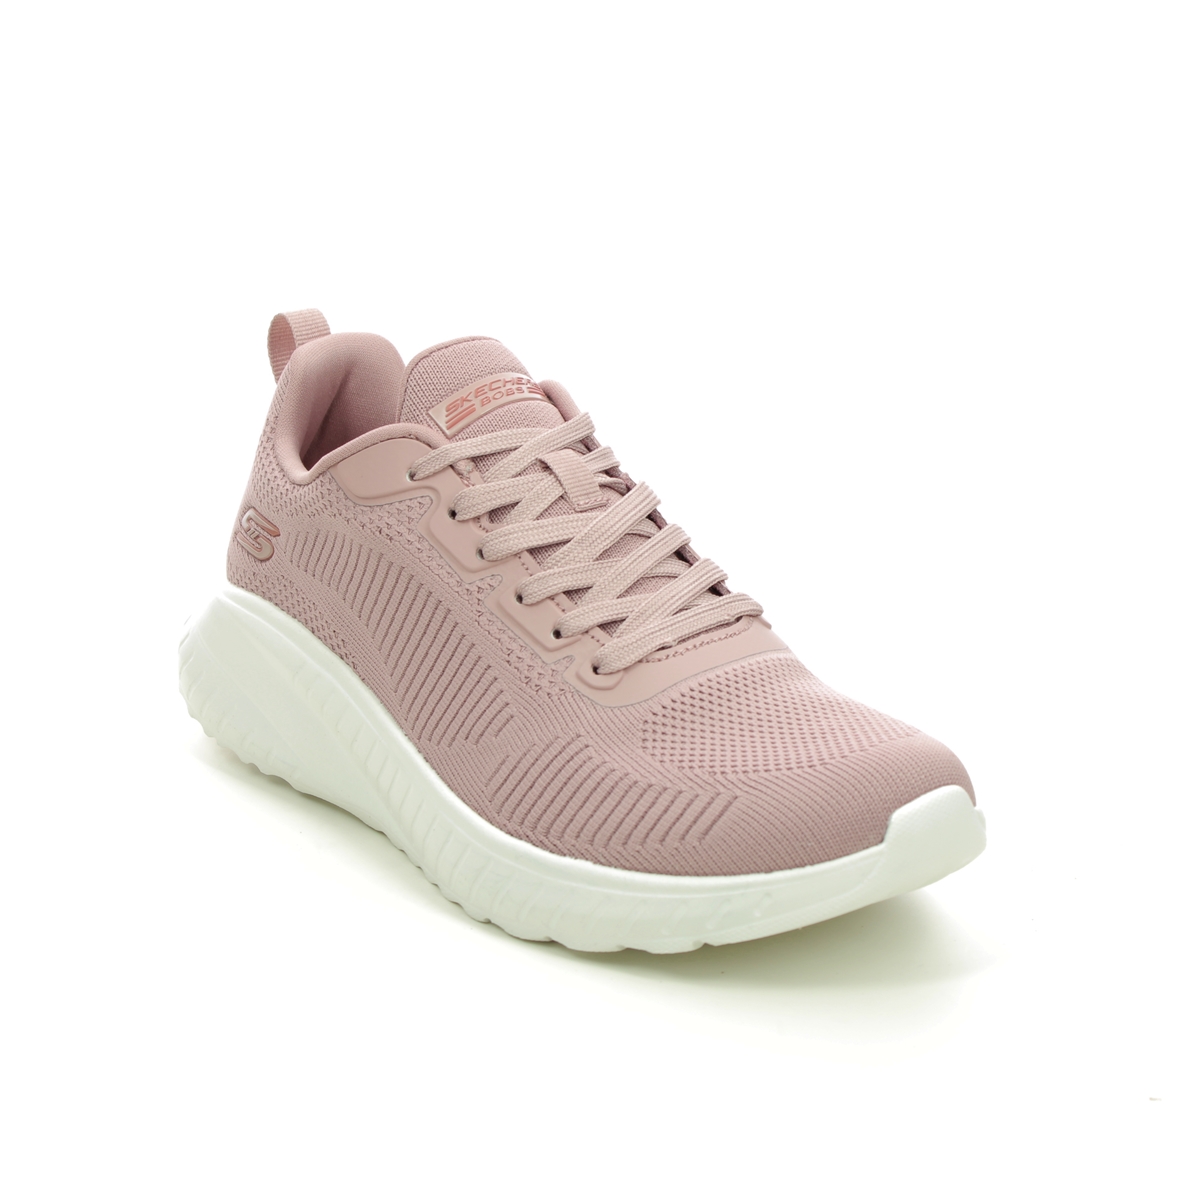 Skechers Bobs Squad Chaos BLSH Blush Pink Womens trainers 117209 in a Plain Textile in Size 6